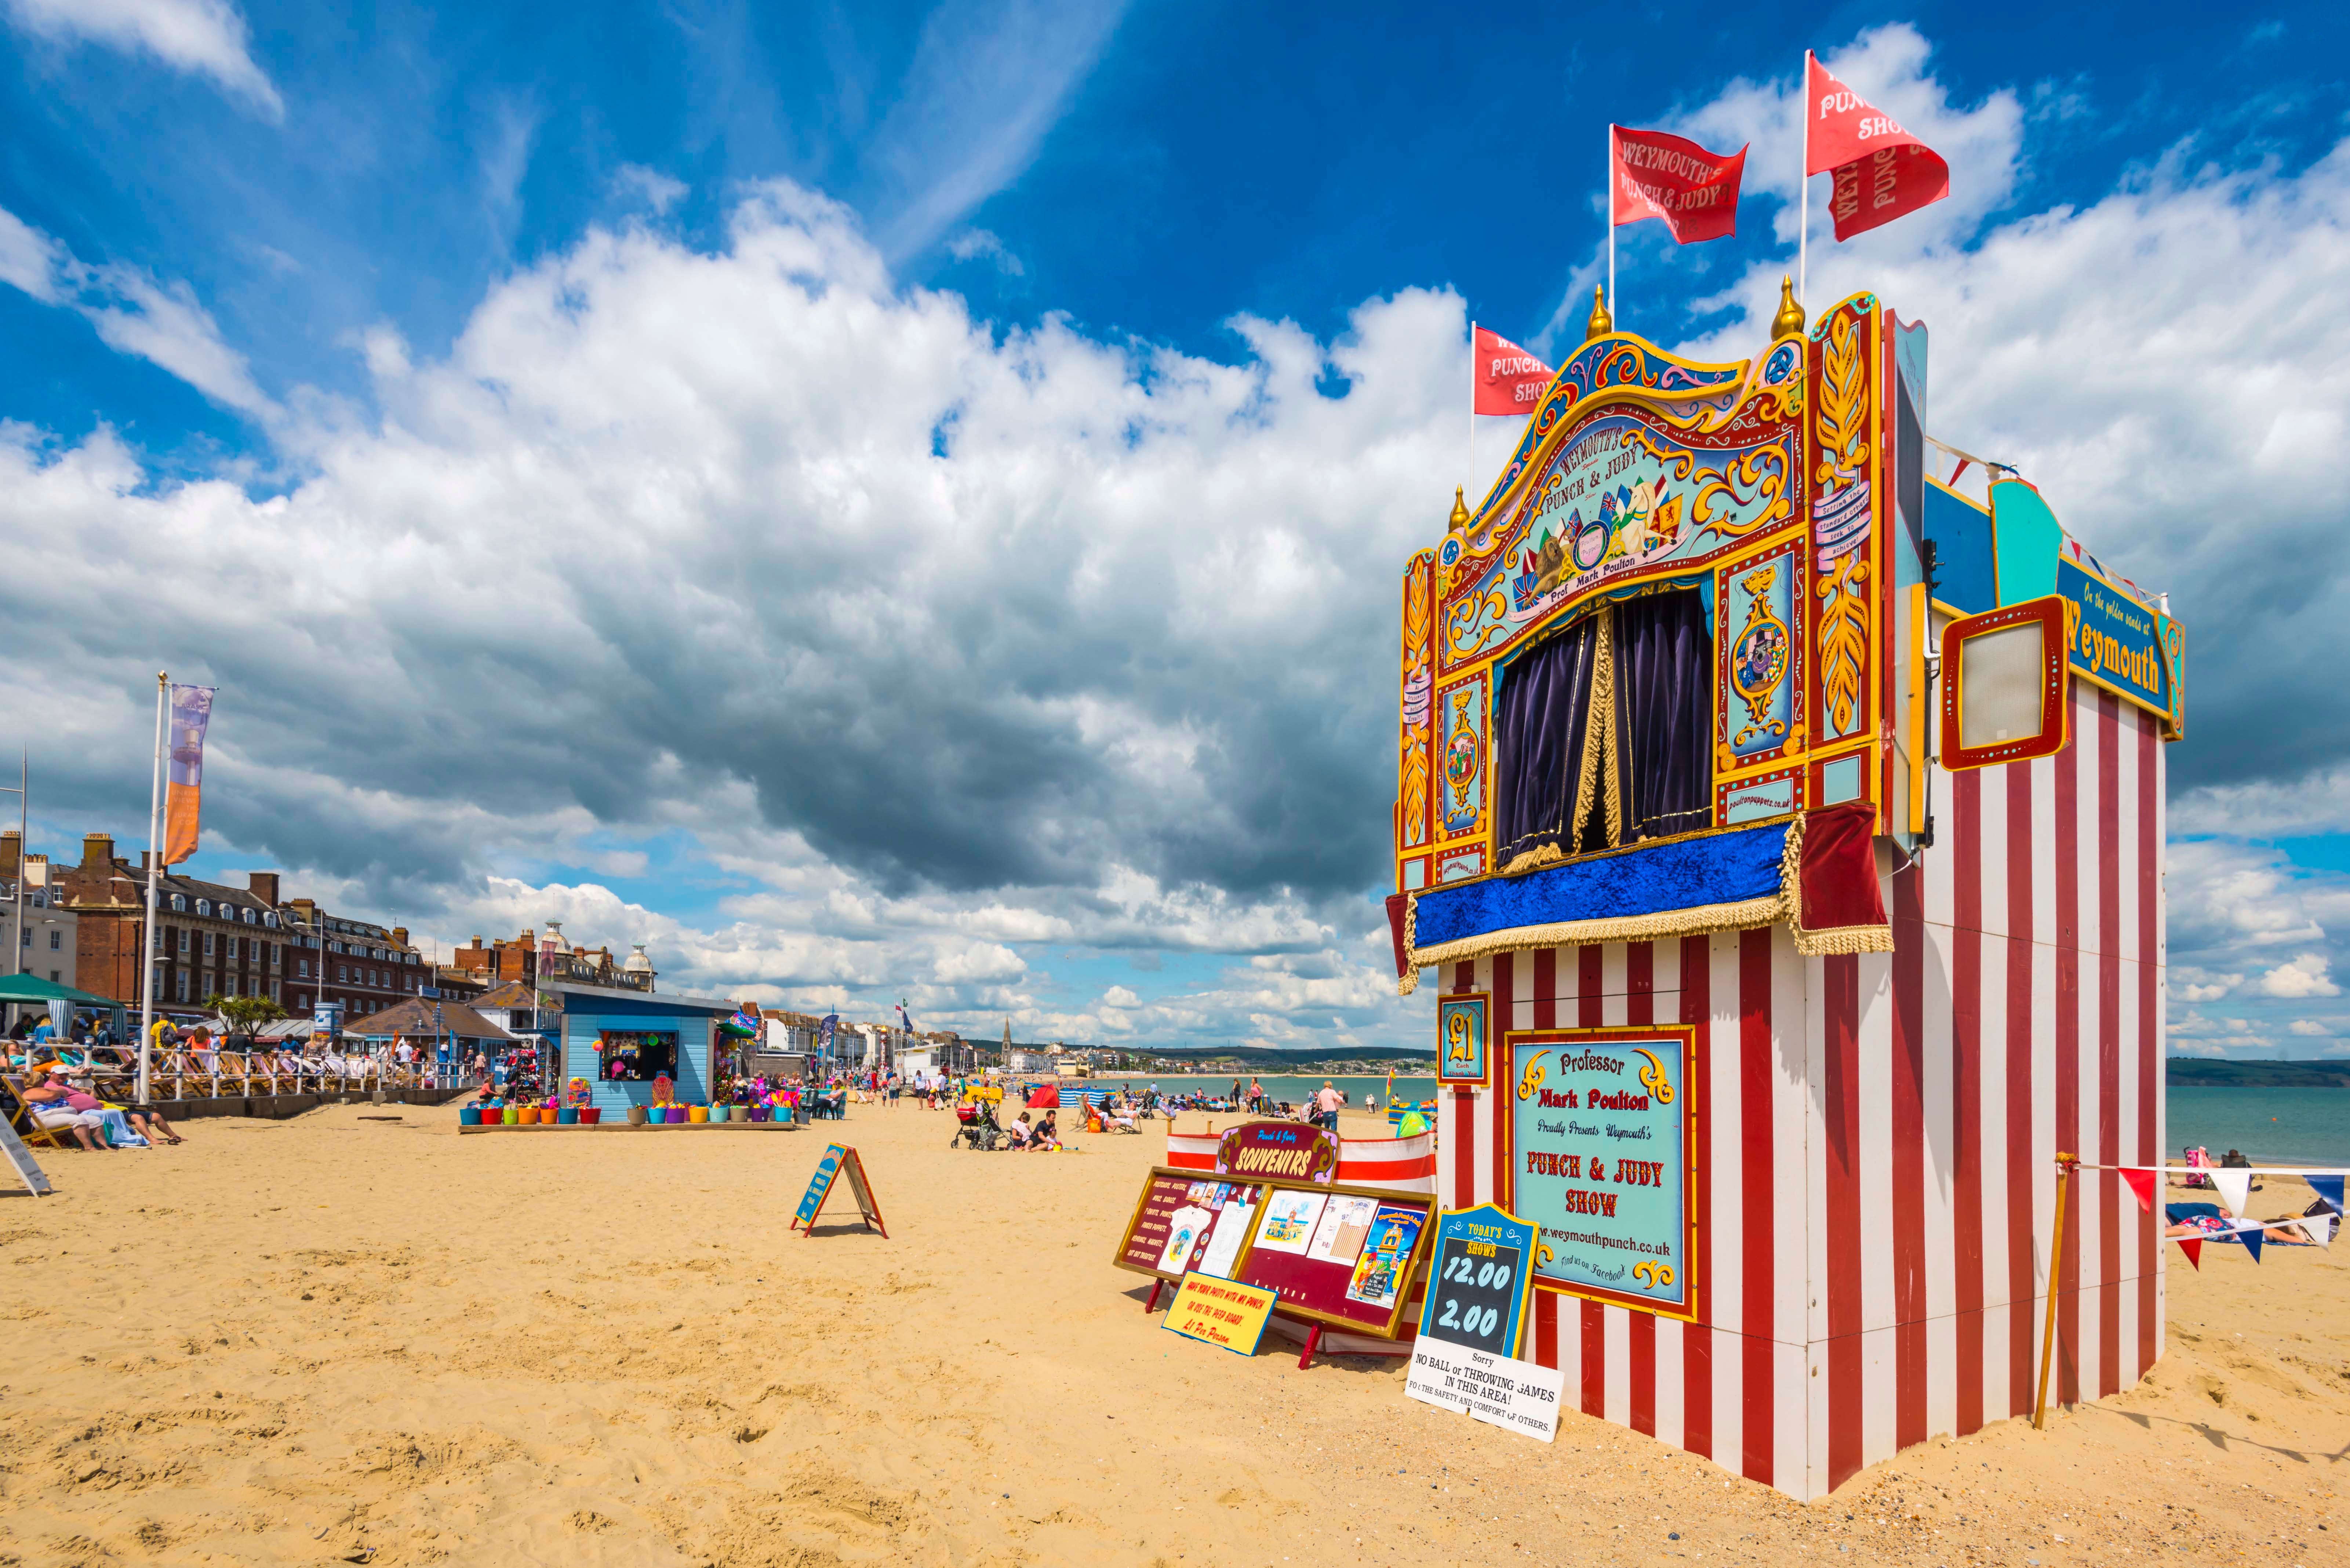 The beach features Punch & Judy shows